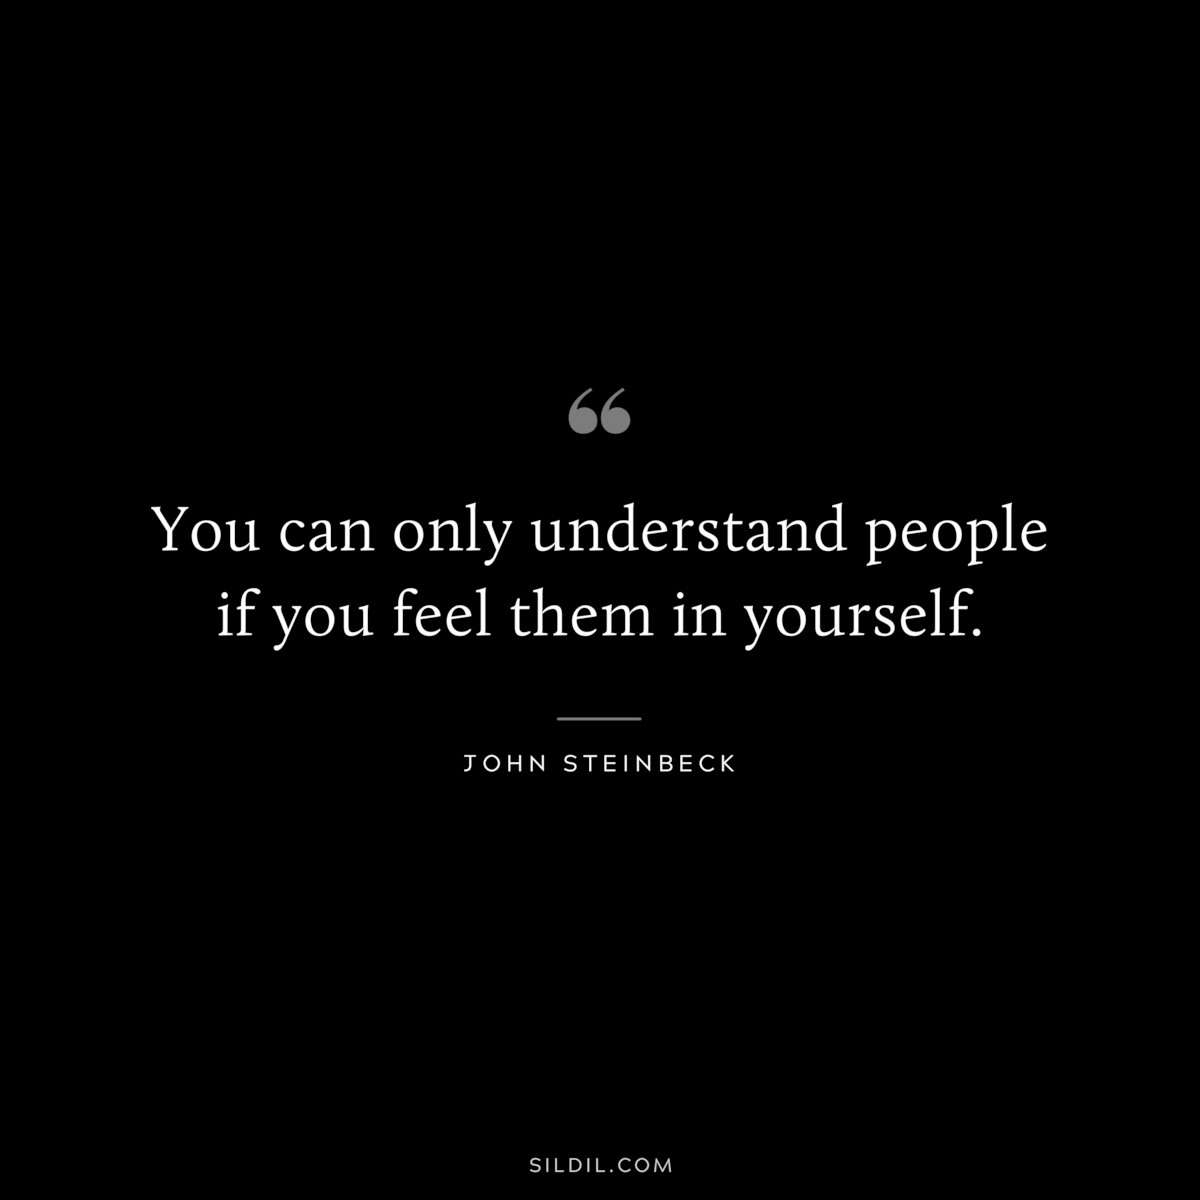 You can only understand people if you feel them in yourself.― John Steinbeck